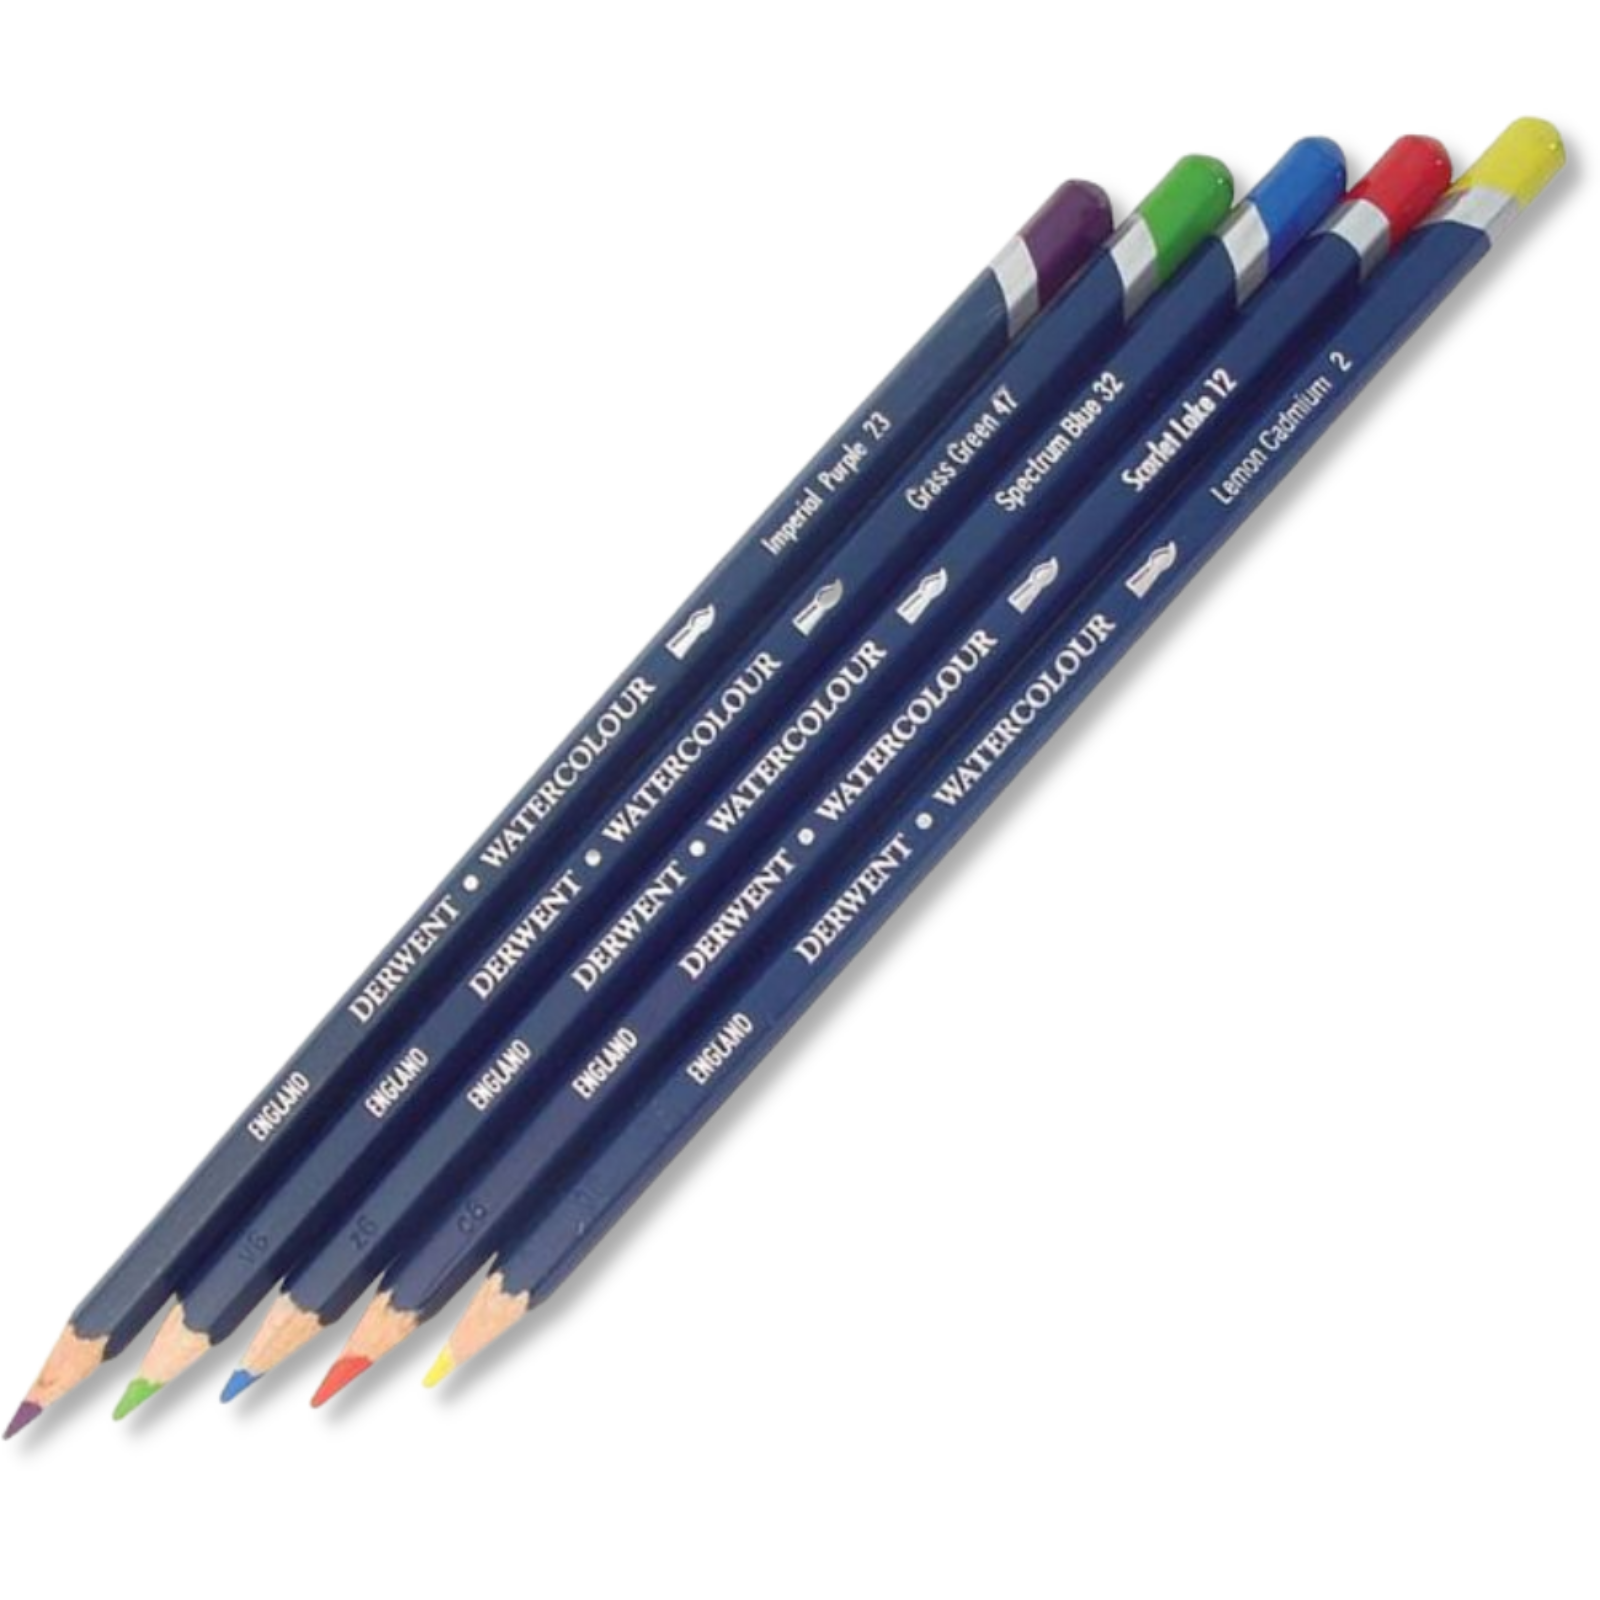 Derwent 24 Watercolour Pencils, Colouring, Blending, Layering, Drawing - The pencils are pre-sharpened for immediate use